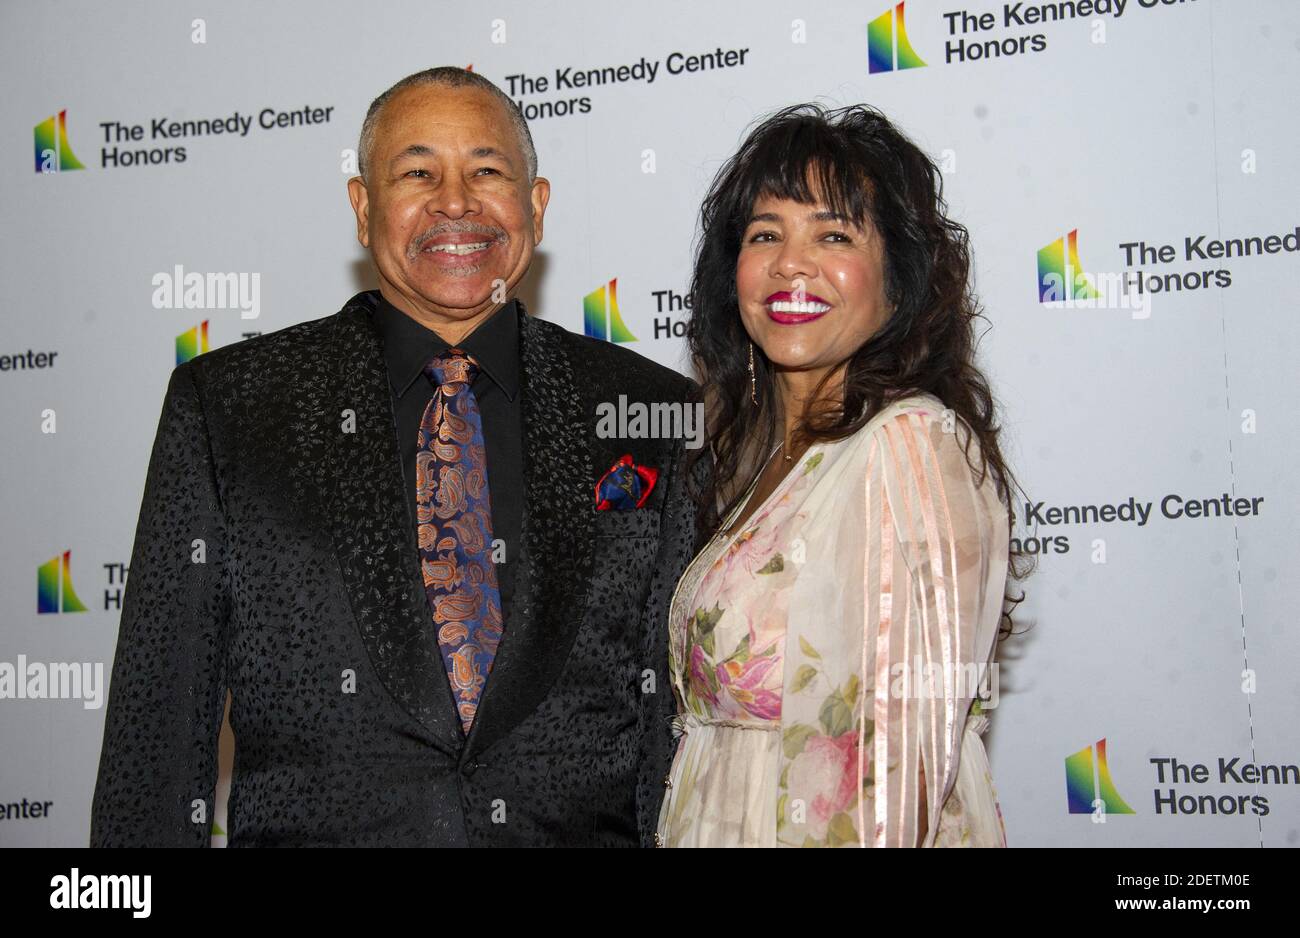 Percussionist Ralph Johnson of Earth, Wind and Fire and his wife, Susan Johnson, arrive for the formal Artist's Dinner honoring the recipients of the 42nd Annual Kennedy Center Honors at the United States Department of State in Washington, D.C. on Saturday, December 7, 2019. The 2019 honorees are: Earth, Wind & Fire, Sally Field, Linda Ronstadt, Sesame Street, and Michael Tilson Thomas. Photo by Ron Sachs/Pool via CNP/ABACAPRESS.COM Stock Photo